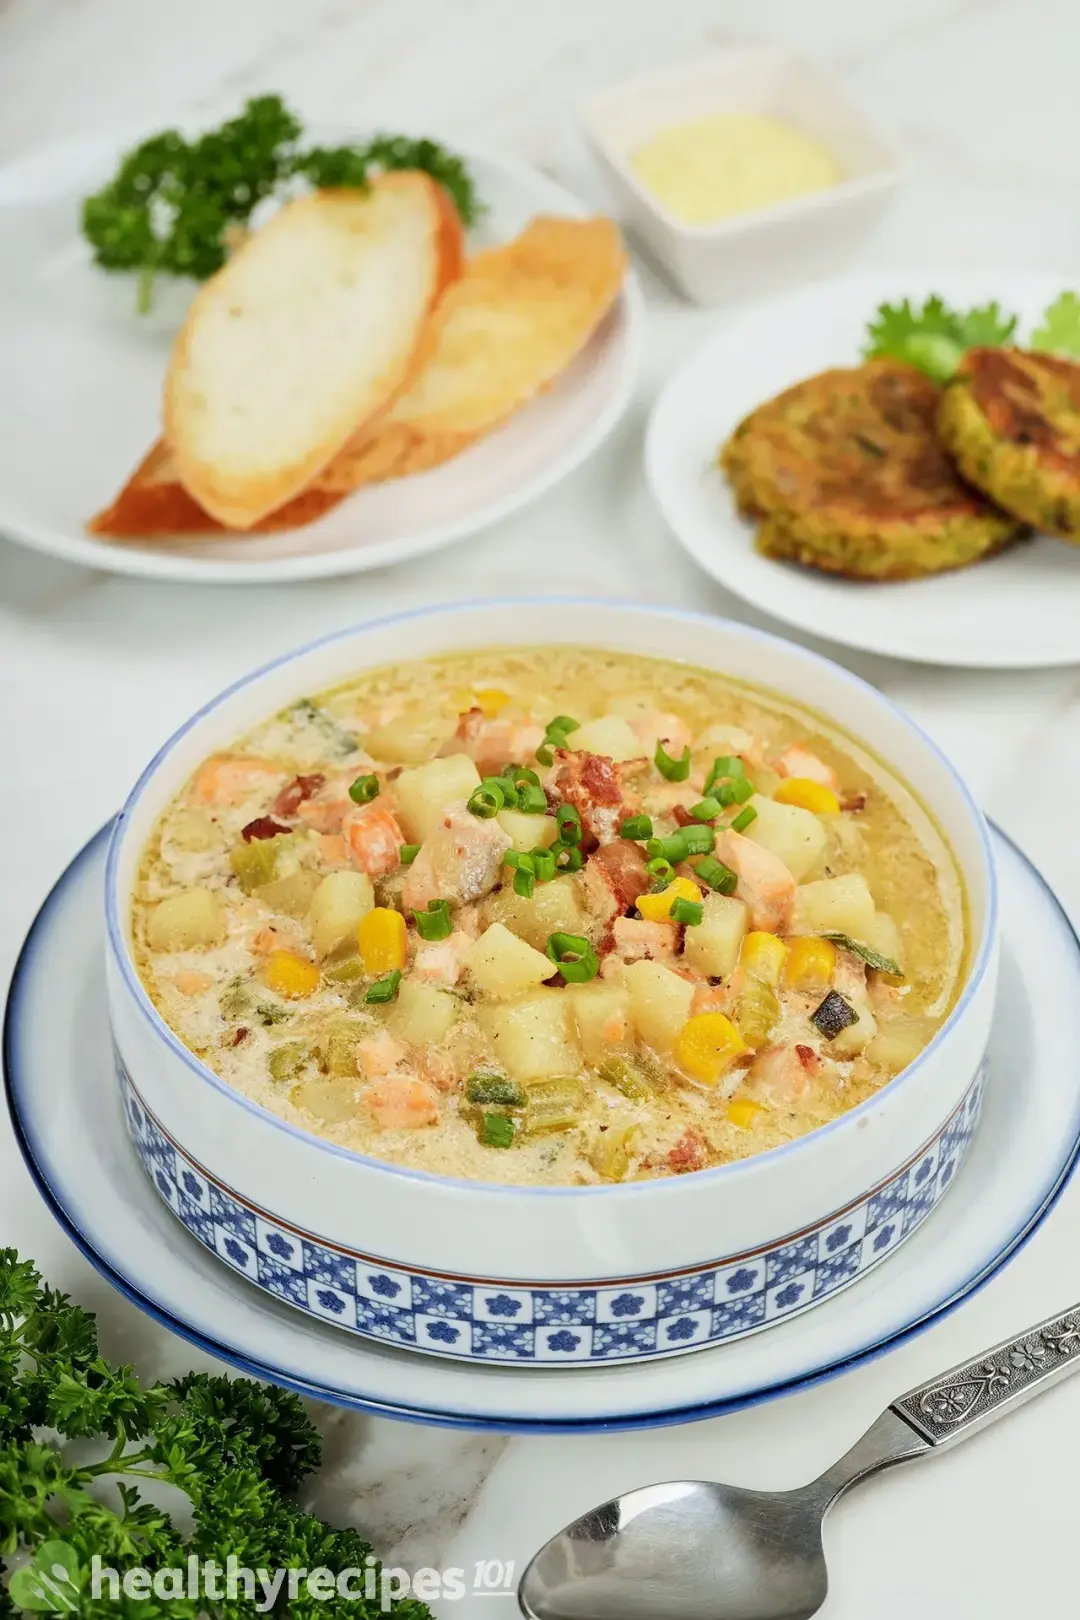 A bowl of salmon chowder with a plate of air-fried baguette slices and falafel on the background